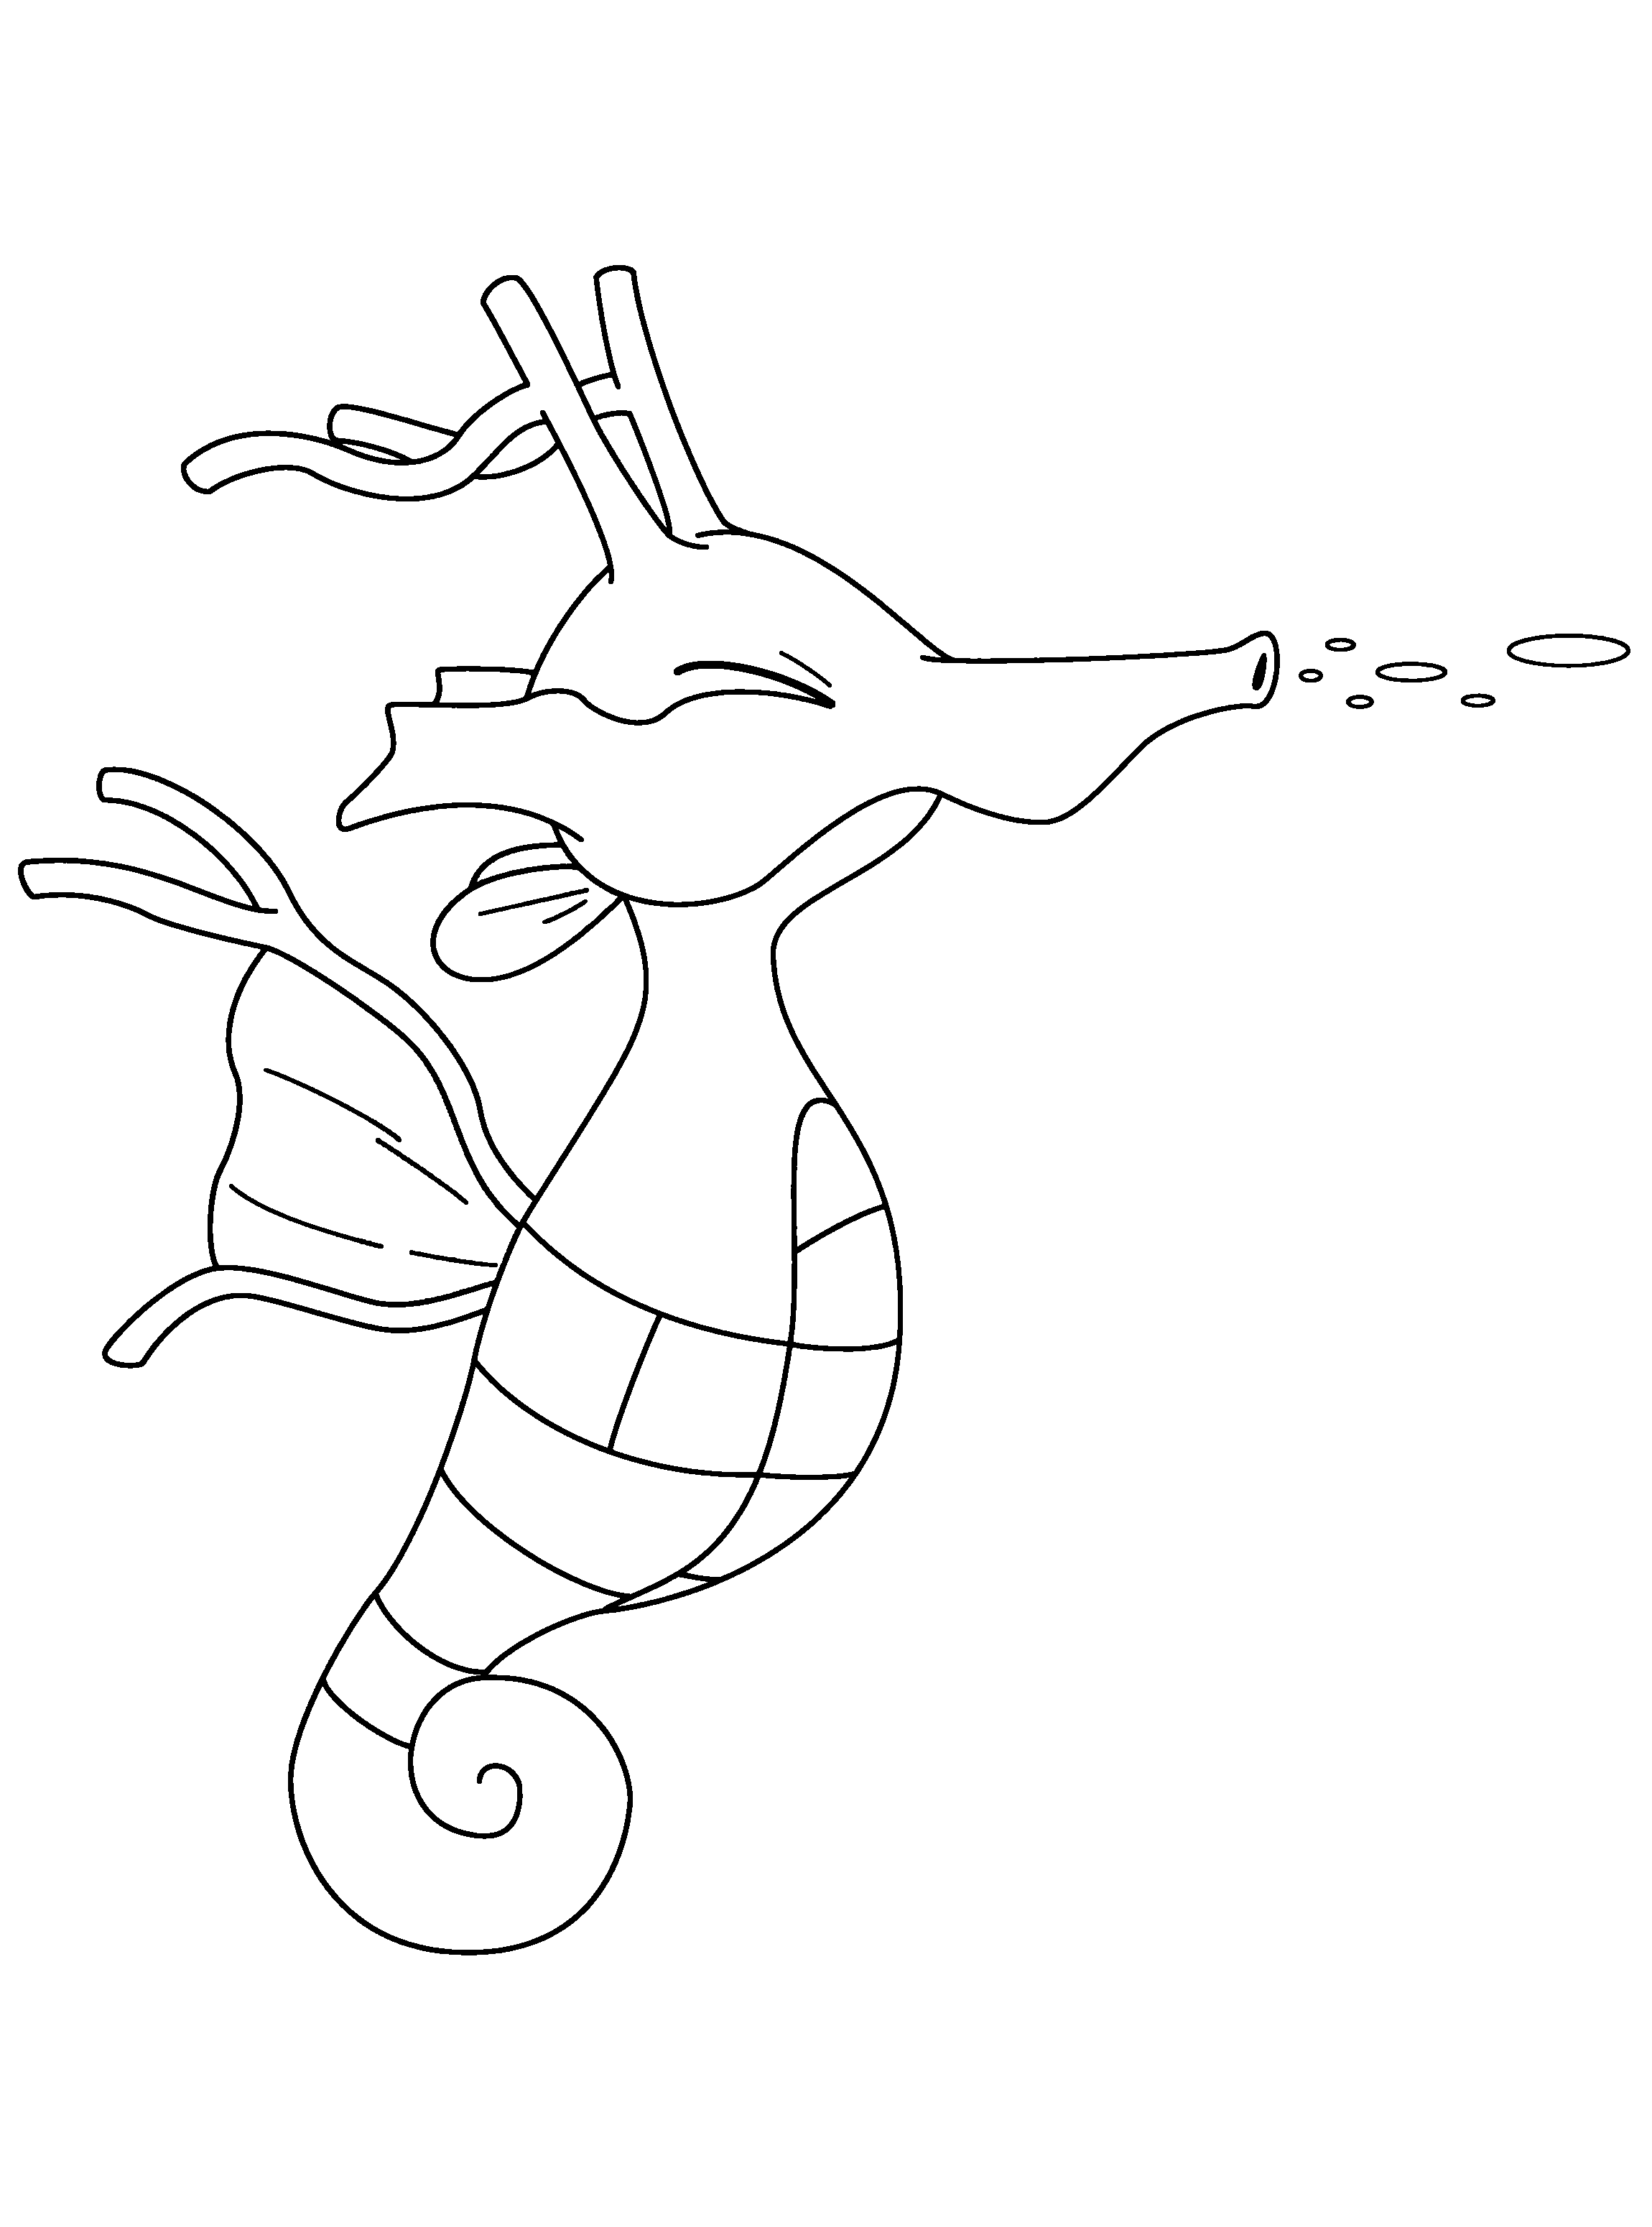 animated-coloring-pages-pokemon-image-0114